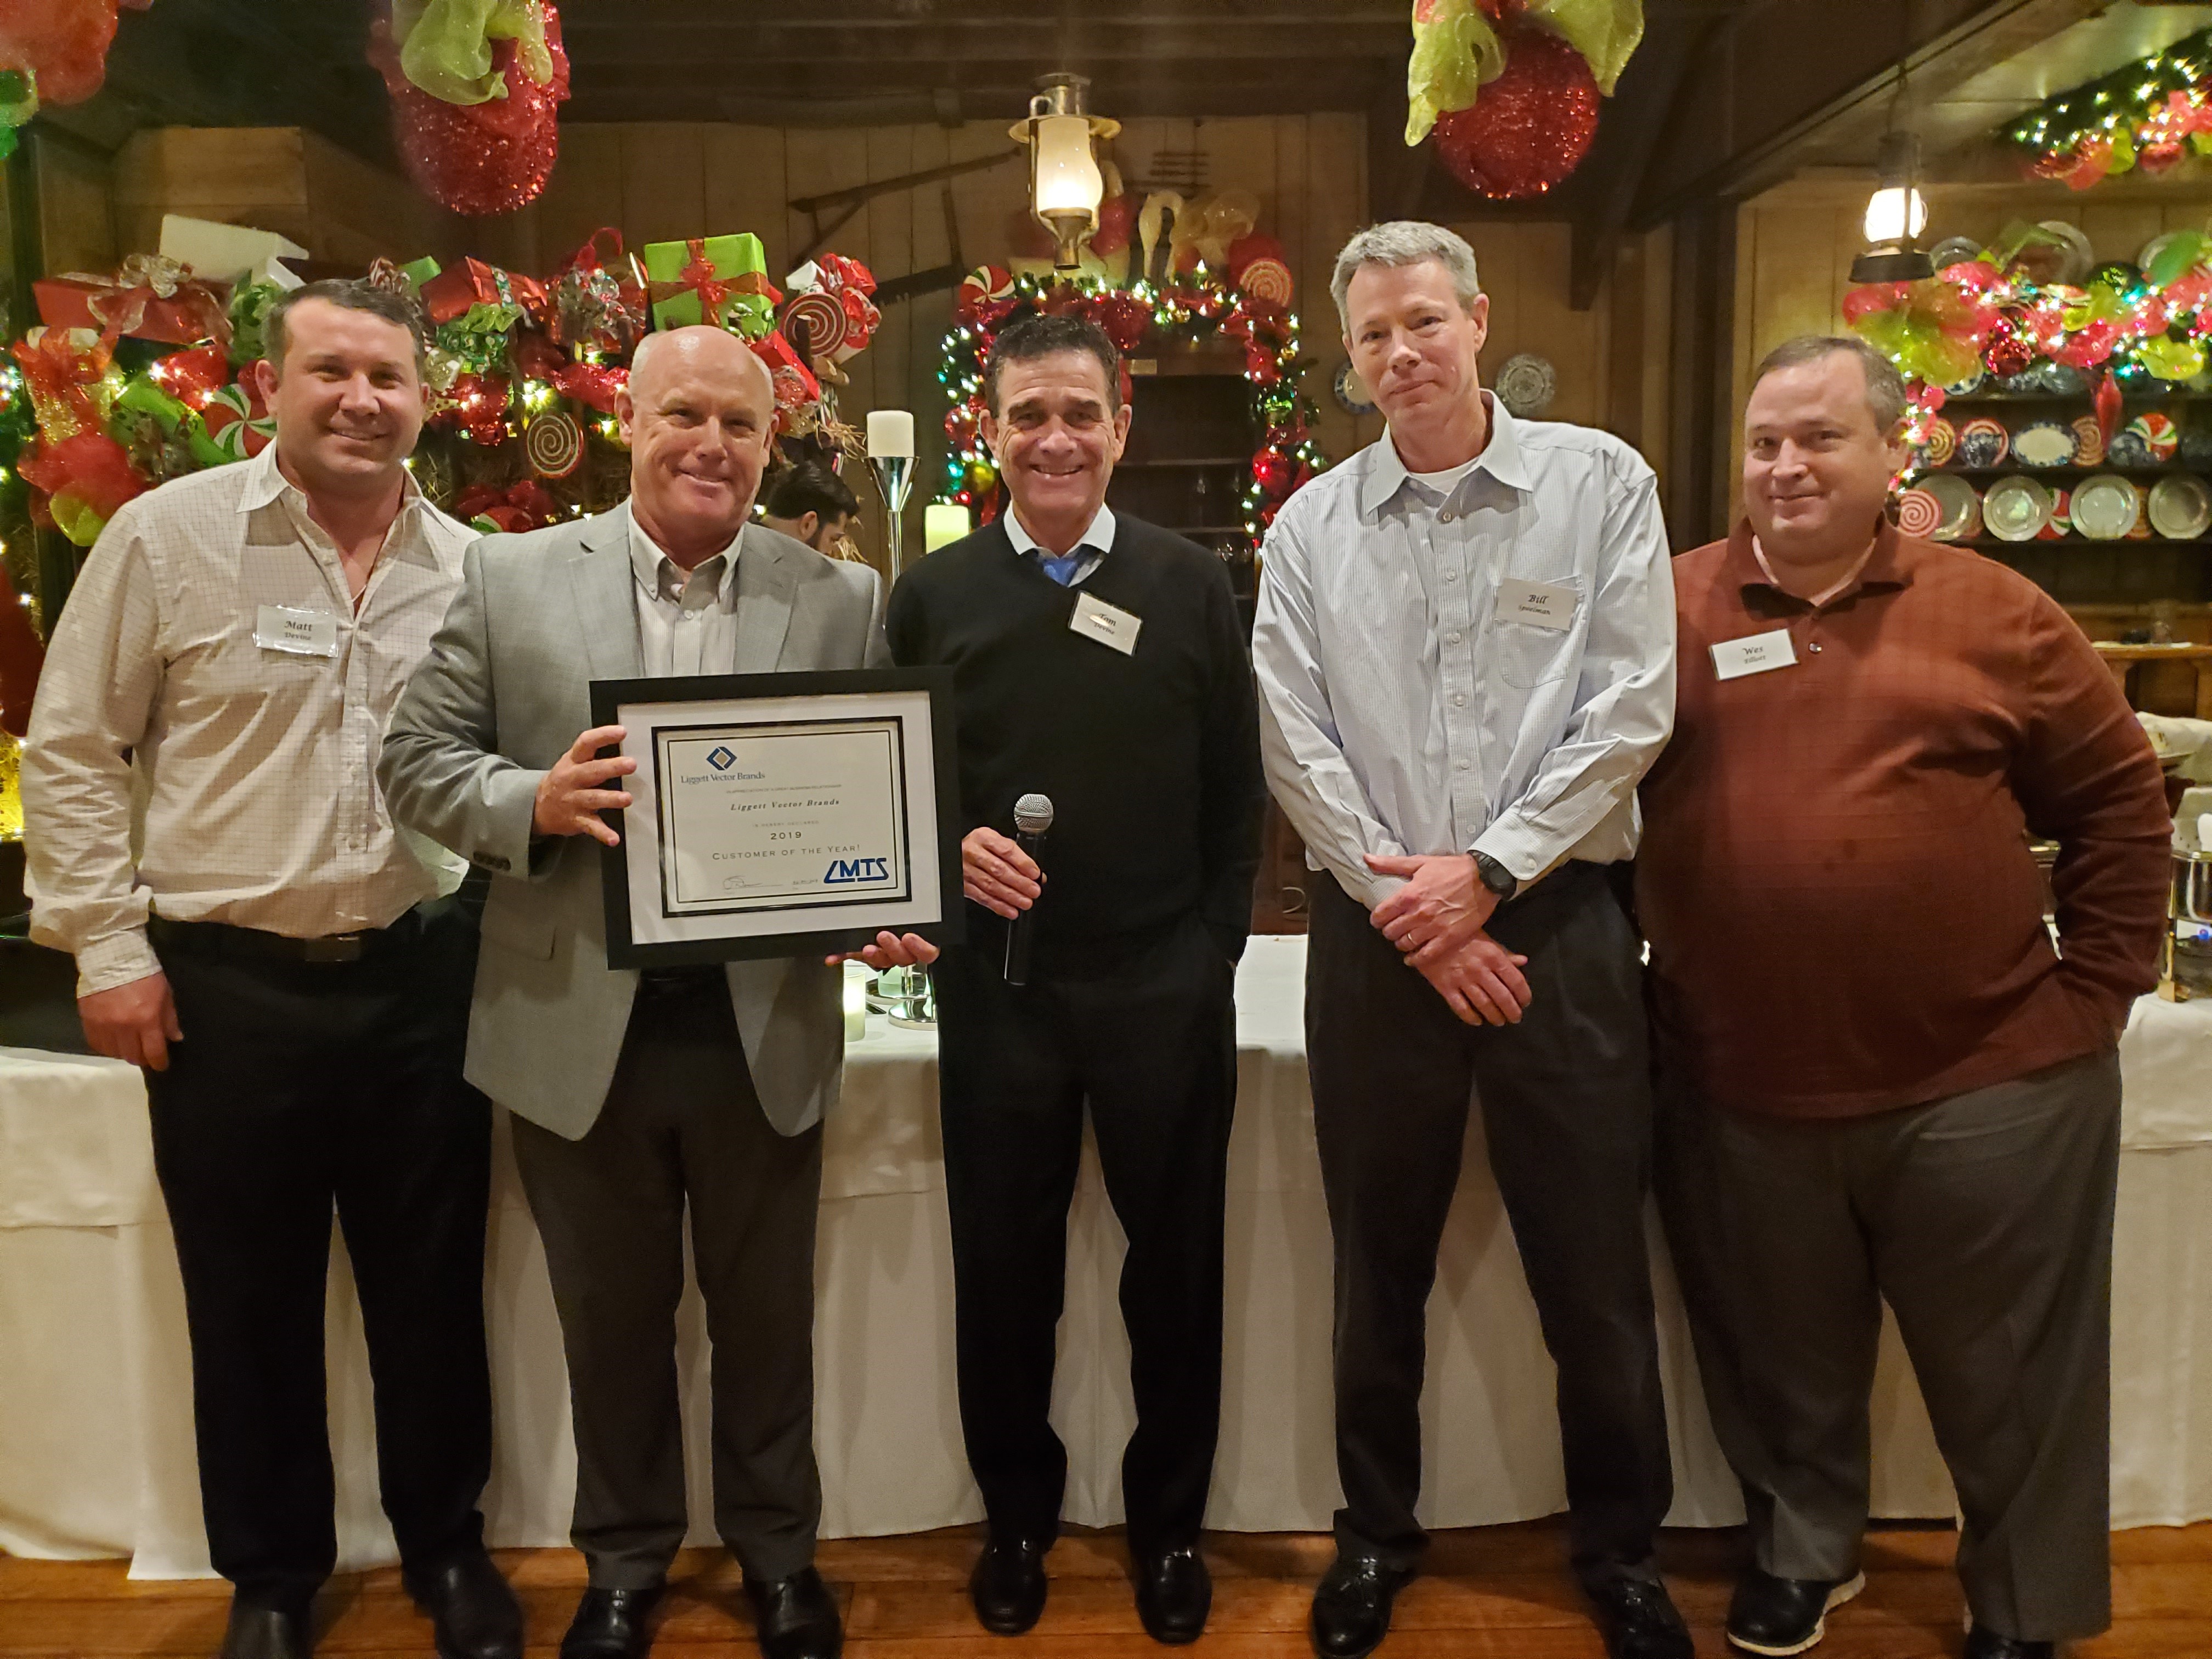 LMTS CELEBRATES CUSTOMER OF THE YEAR